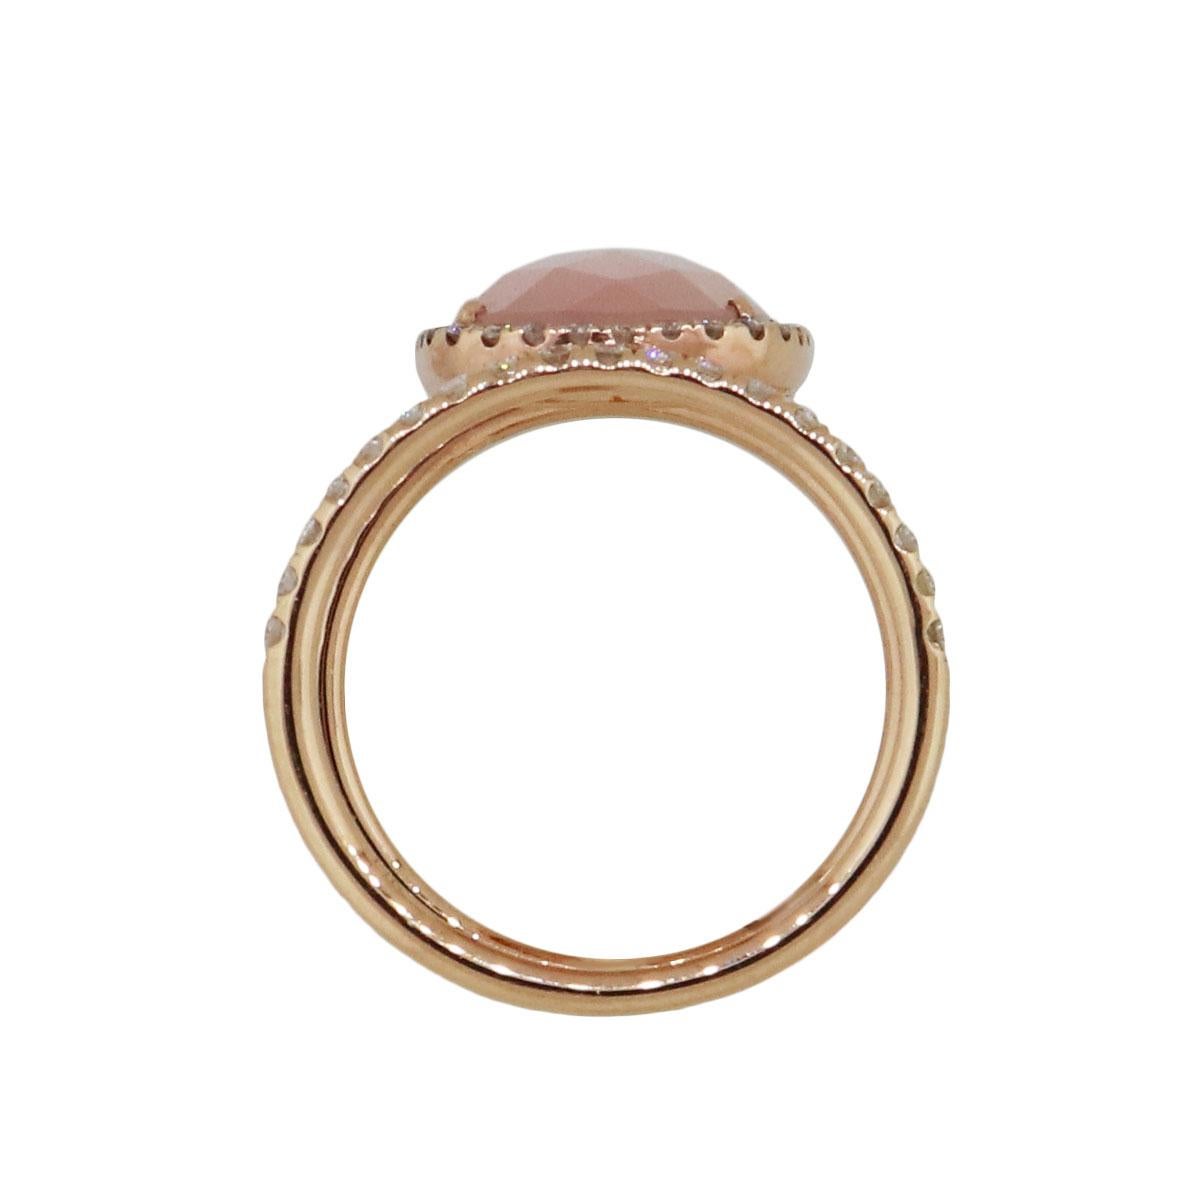 Material: 14k rose gold
Diamond Details: Approximately 0.57ctw of round brilliant diamonds. Diamonds are G/H in color and SI in clarity
Gemstone Details: Rose quartz gemstone measuring approximately 0.60″ x 0.36″
Ring Measurements: 0.89″ x 0.81″ x